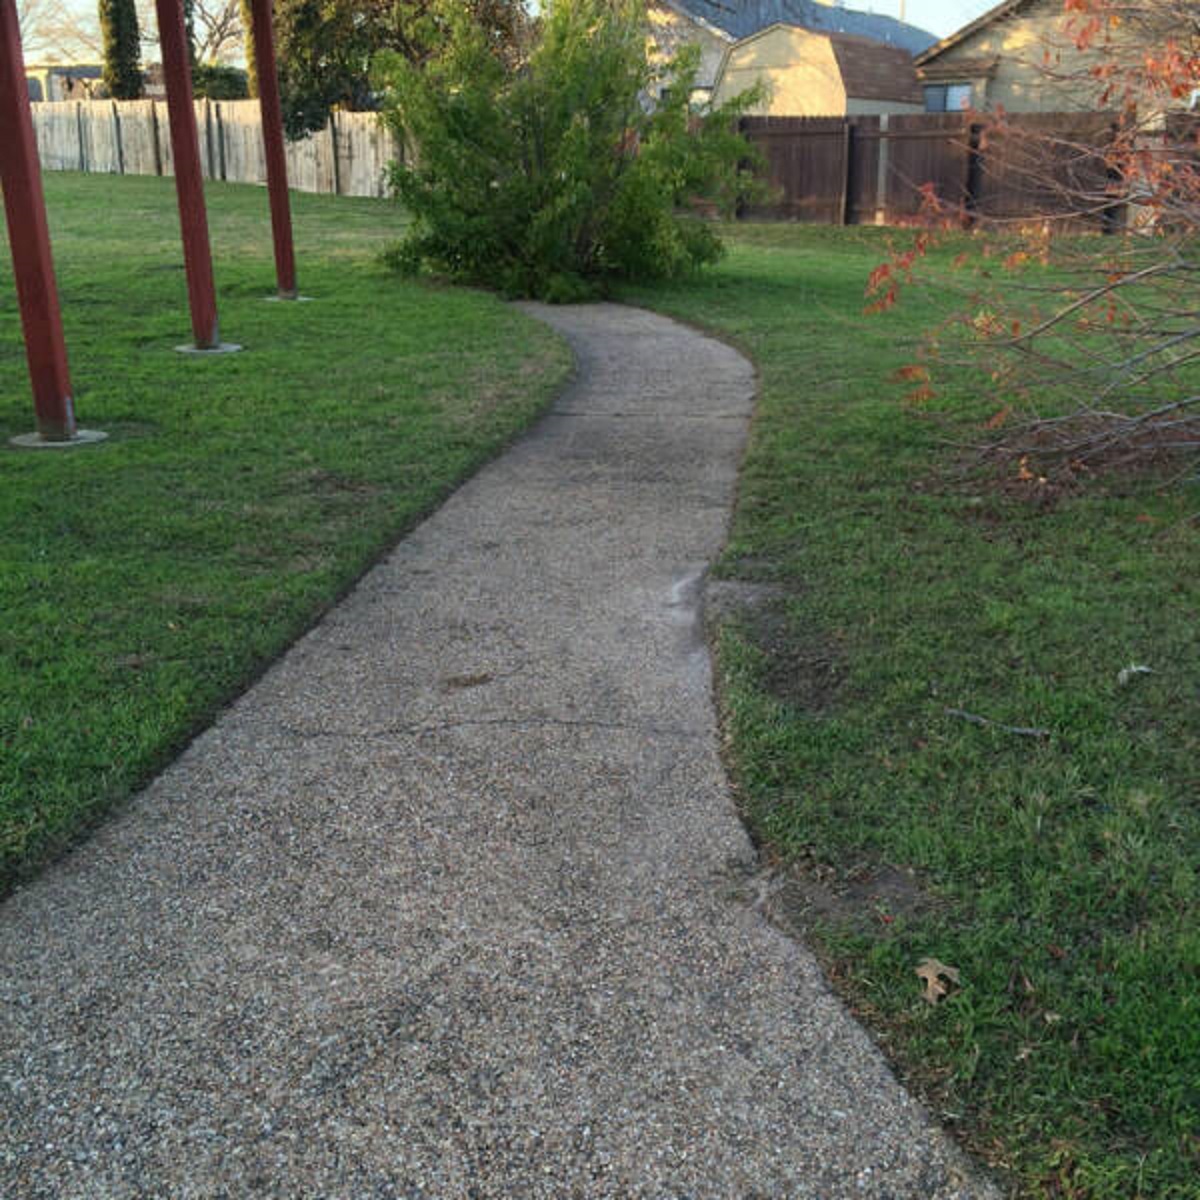 “This sidewalk just ends at this huge bush.”